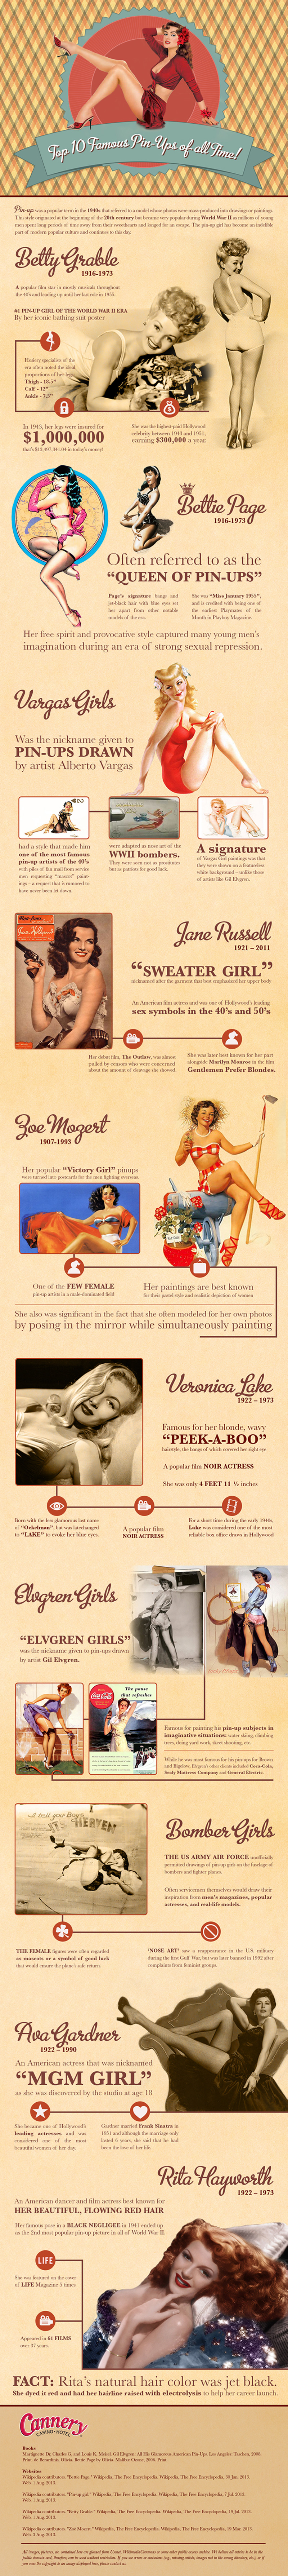 Top 10 Famous Pin-Ups of All Time